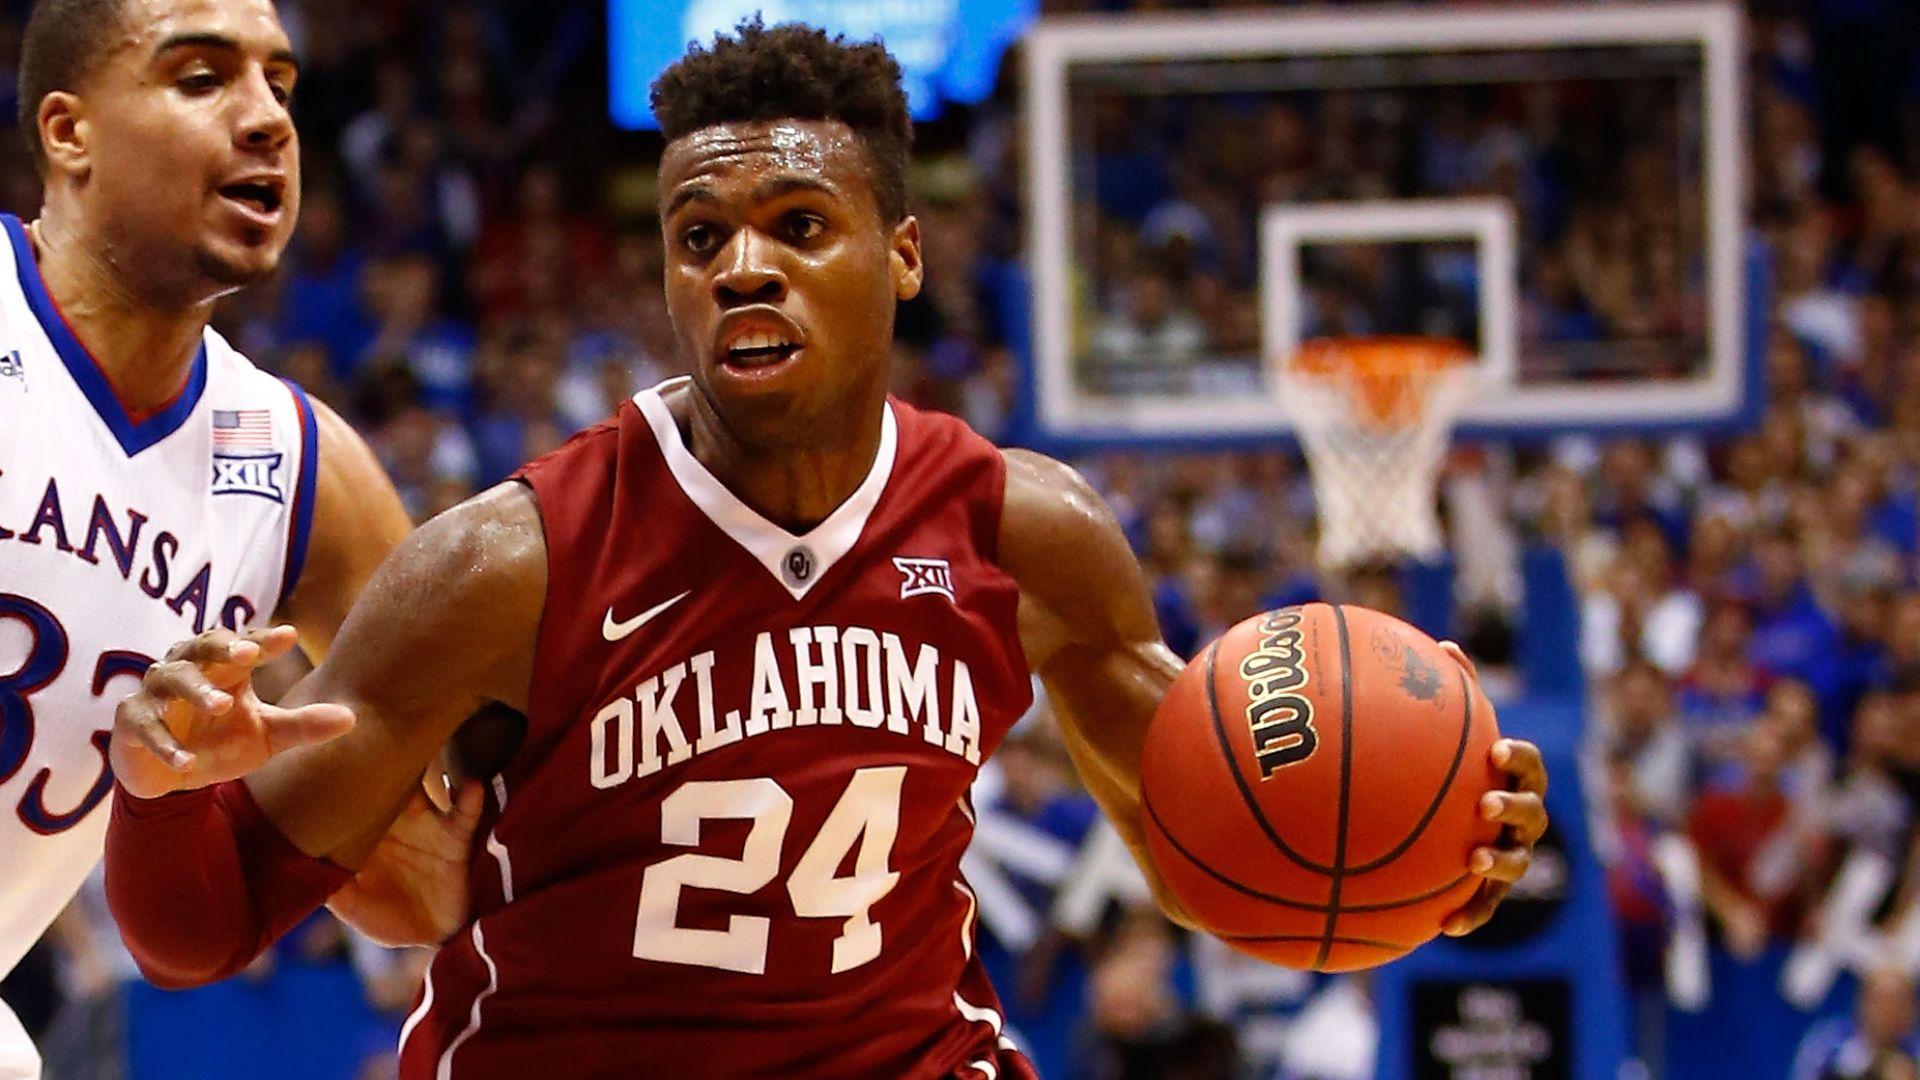 Despite age, Buddy Hield's superb shooting could land him in NBA